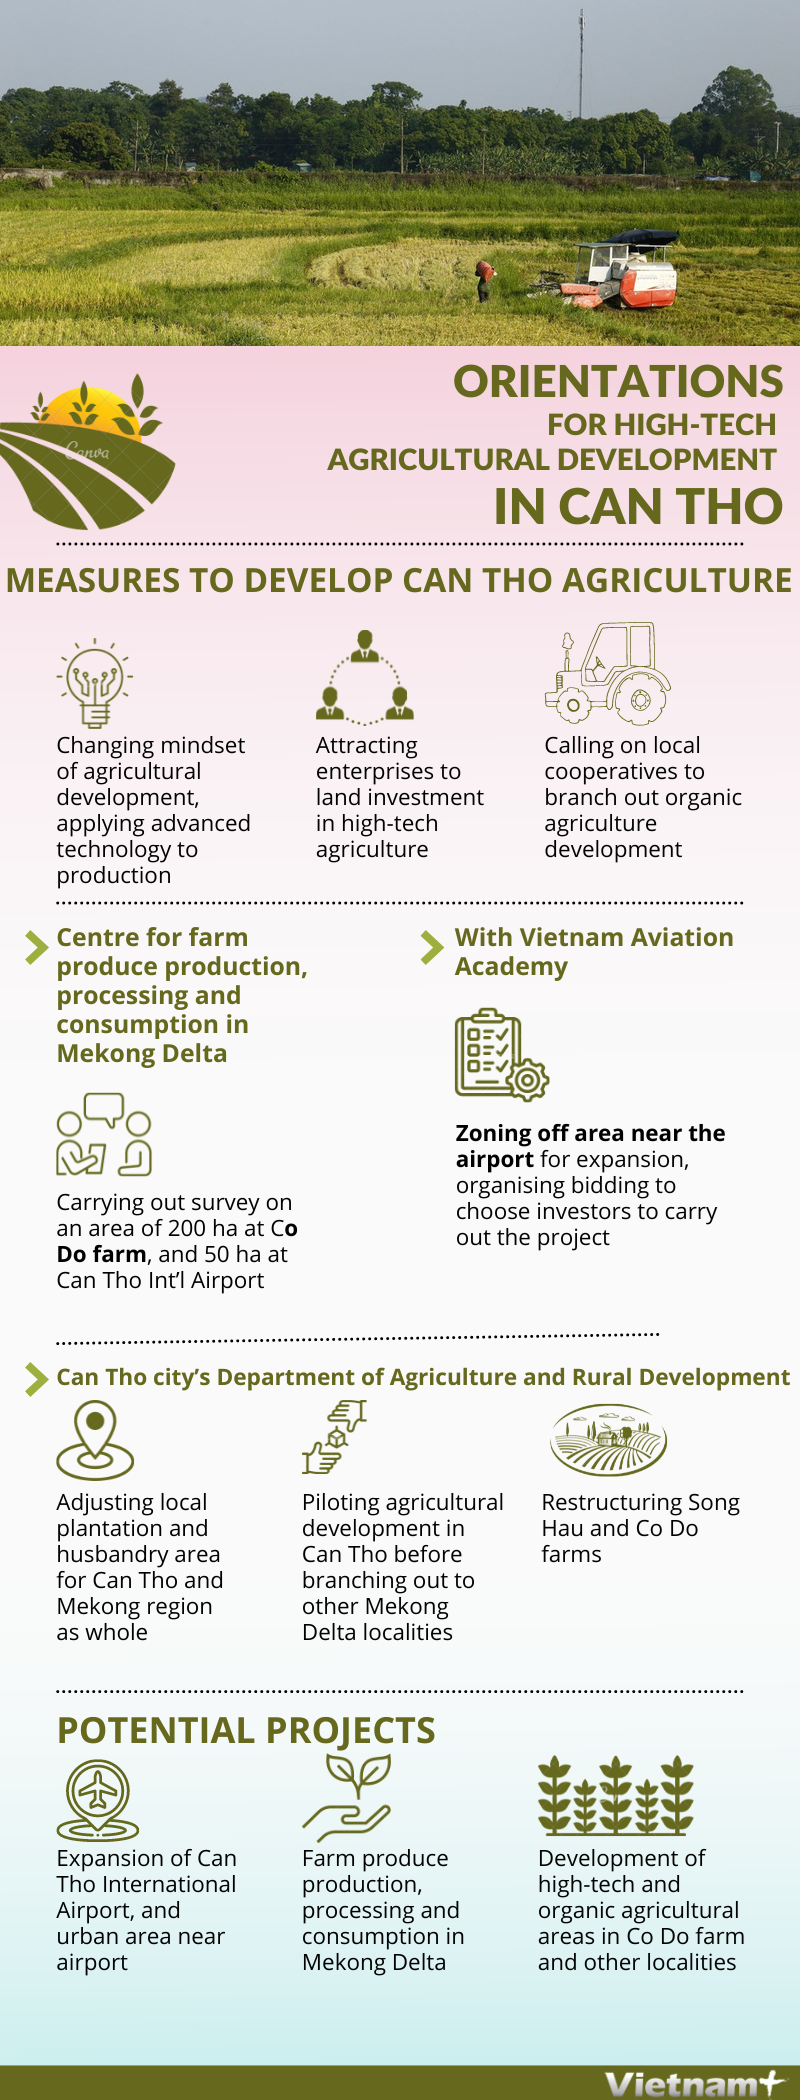 Orientations for high-tech agricultural development in Can Tho hinh anh 1